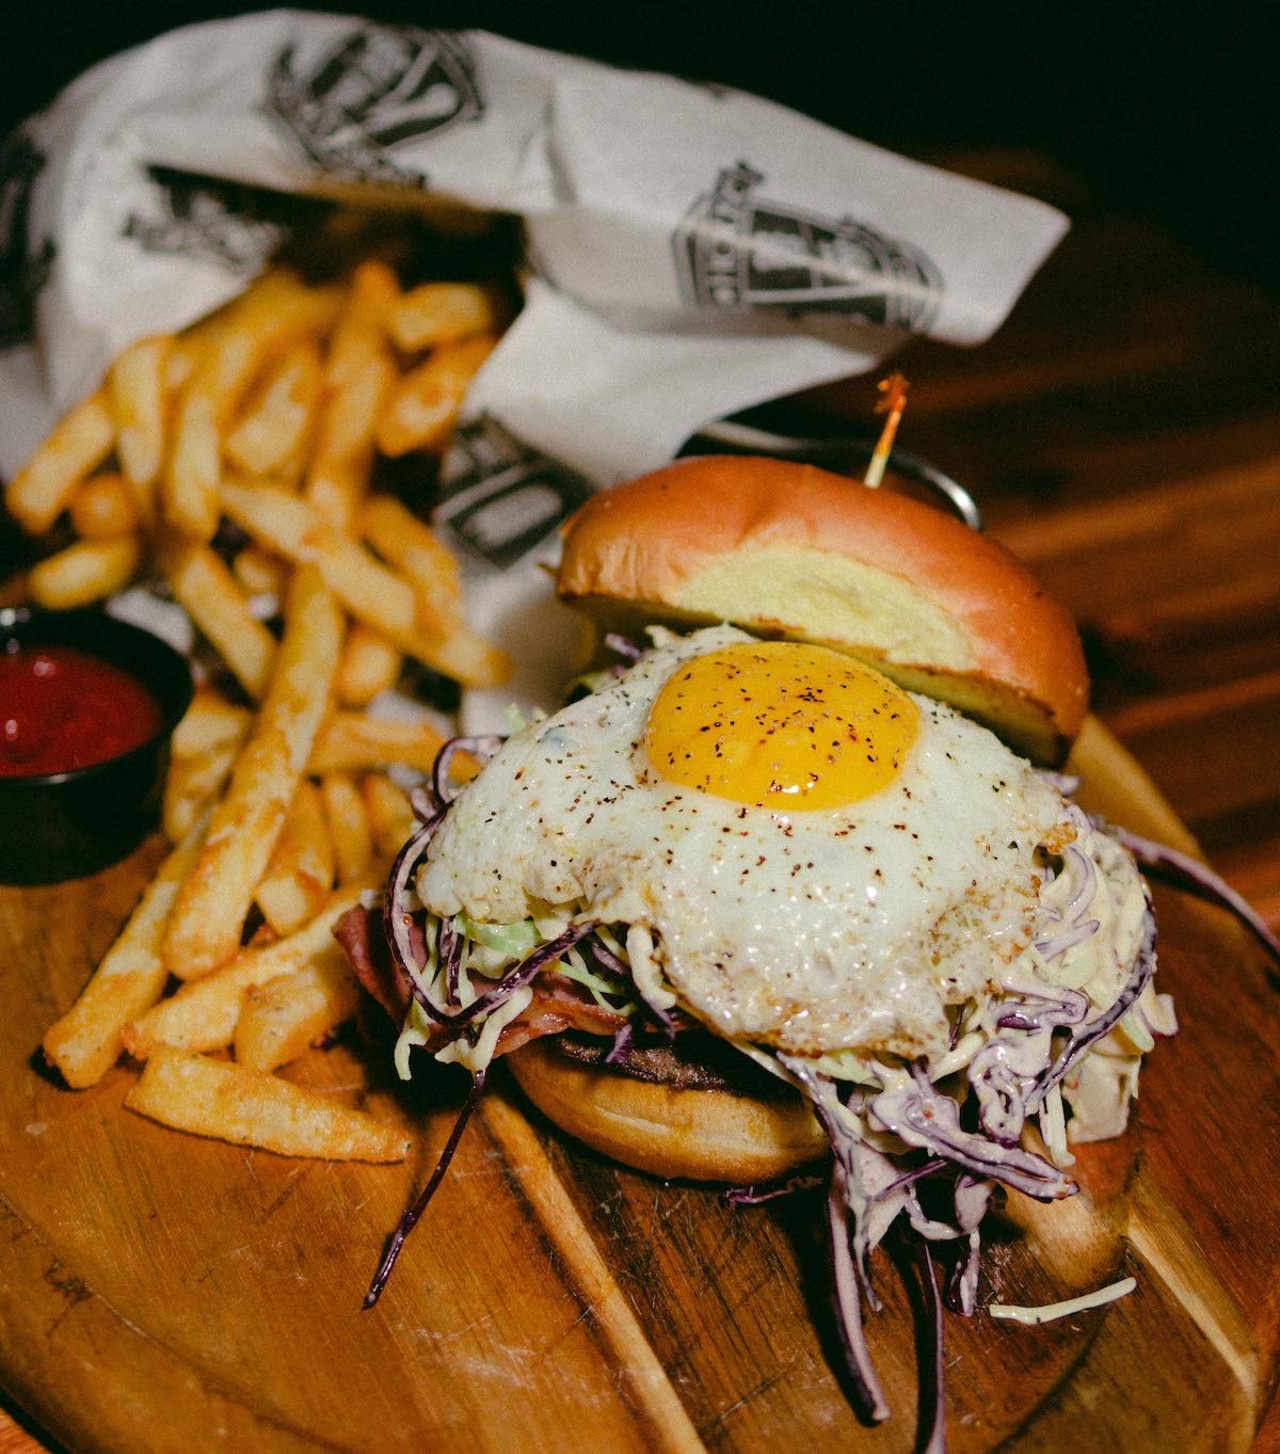  Barley House
1261 West 6th St., Cleveland
Barley House is offering their double smashed Ohio beef patties with corned beef, a fried egg, Barley House cole slaw and a brioche bun.They’re offering the Brew Kettle Special, a burger and can of Jalapeño White Raja for $10.